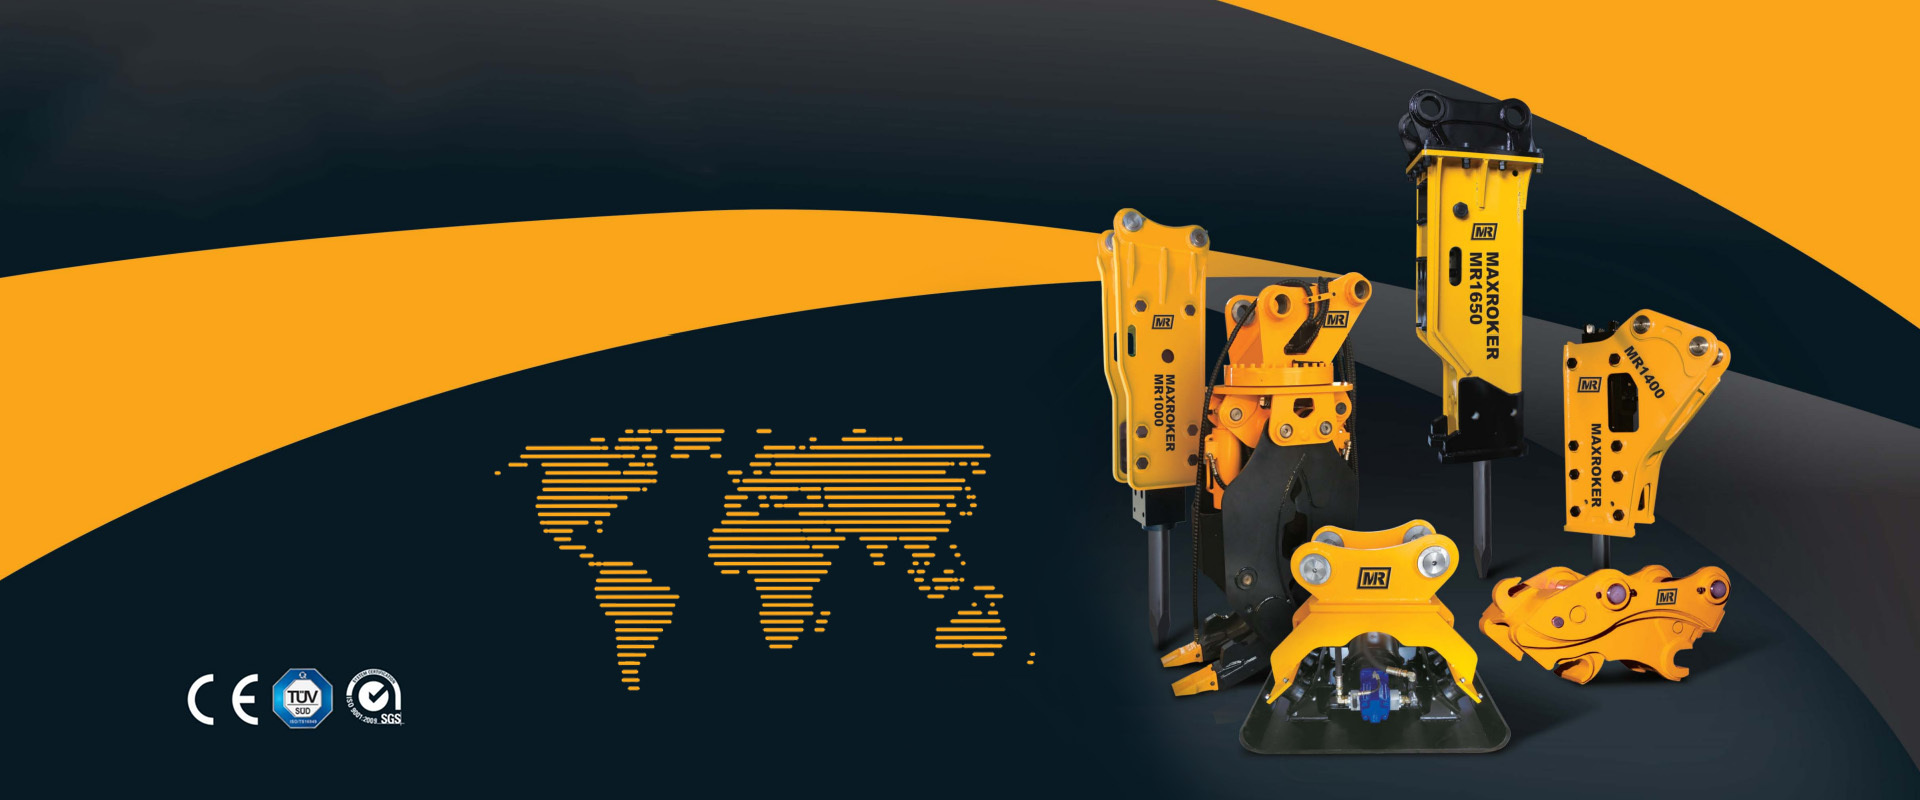 The Excavator Front-End Equipments Provider